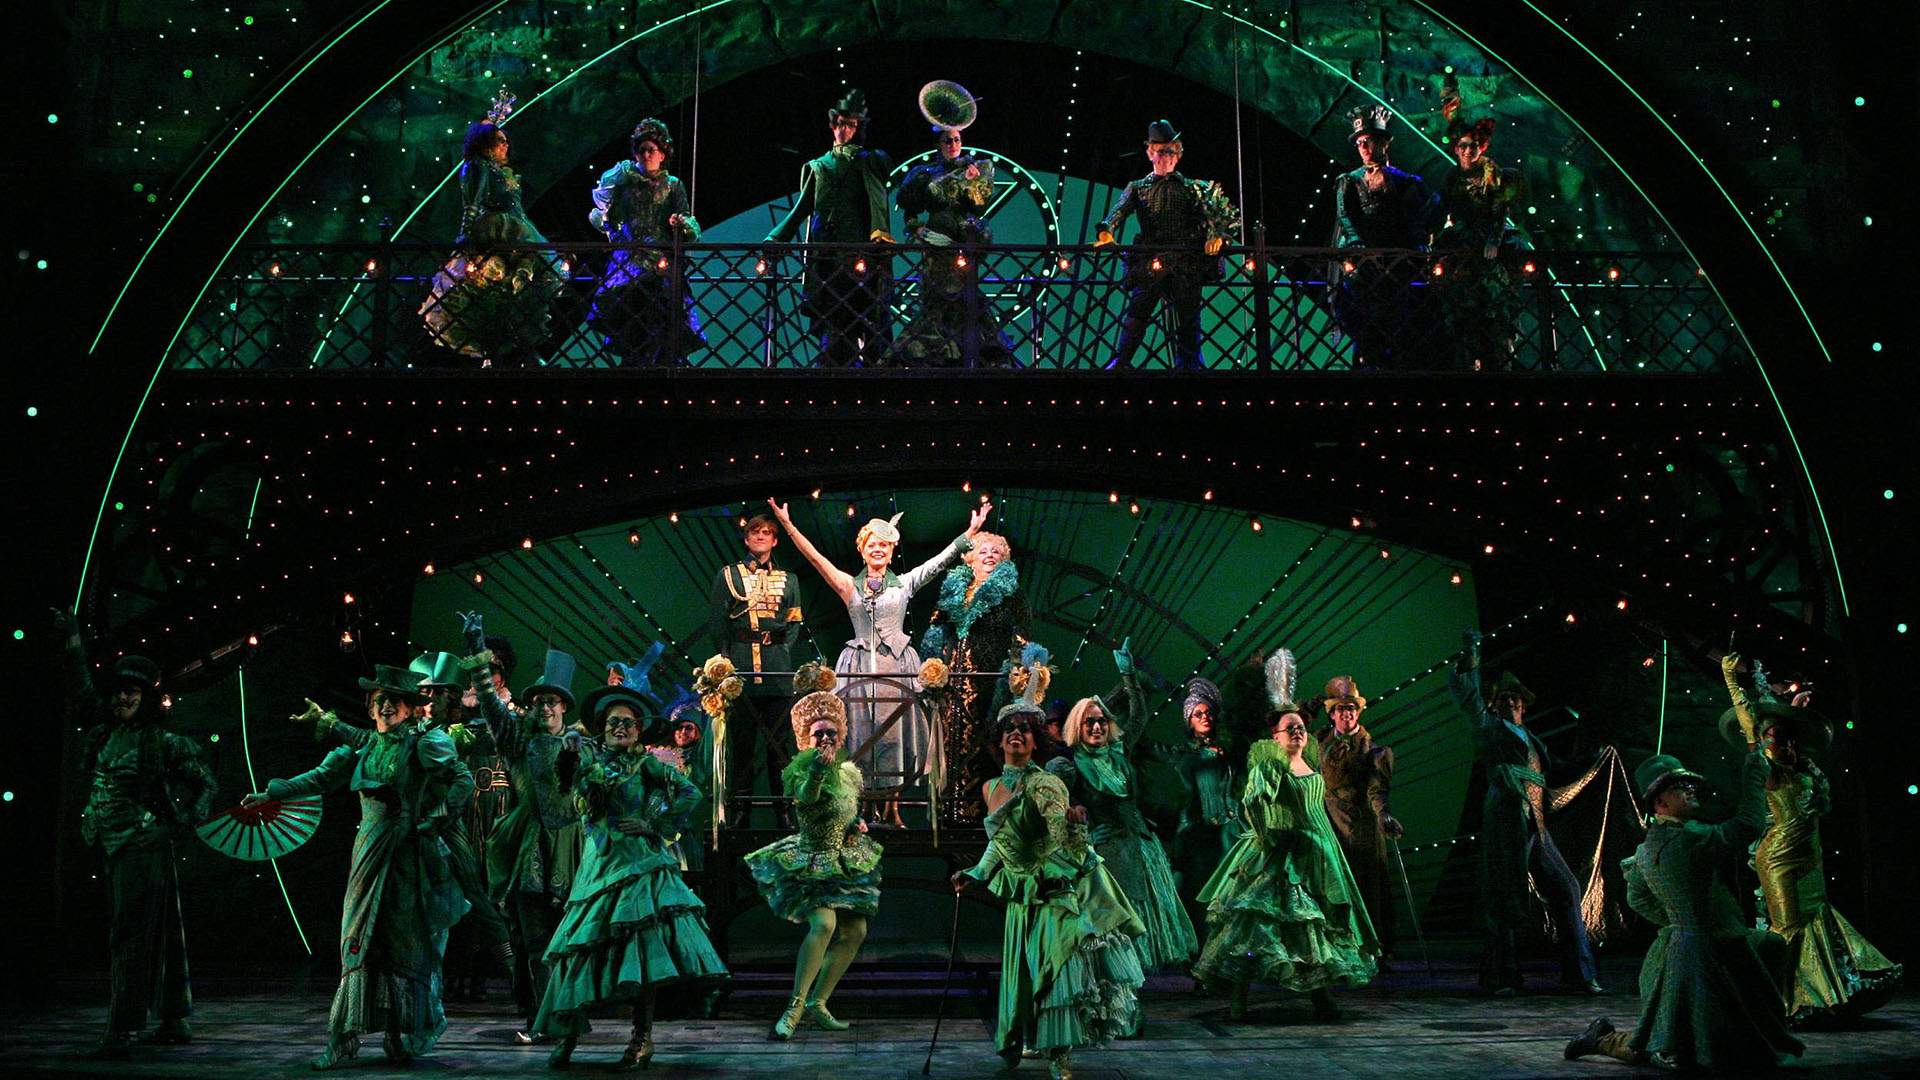 'The Wizard of Oz'-Inspired Blockbuster Musical 'Wicked' Is Returning to Australia in 2023